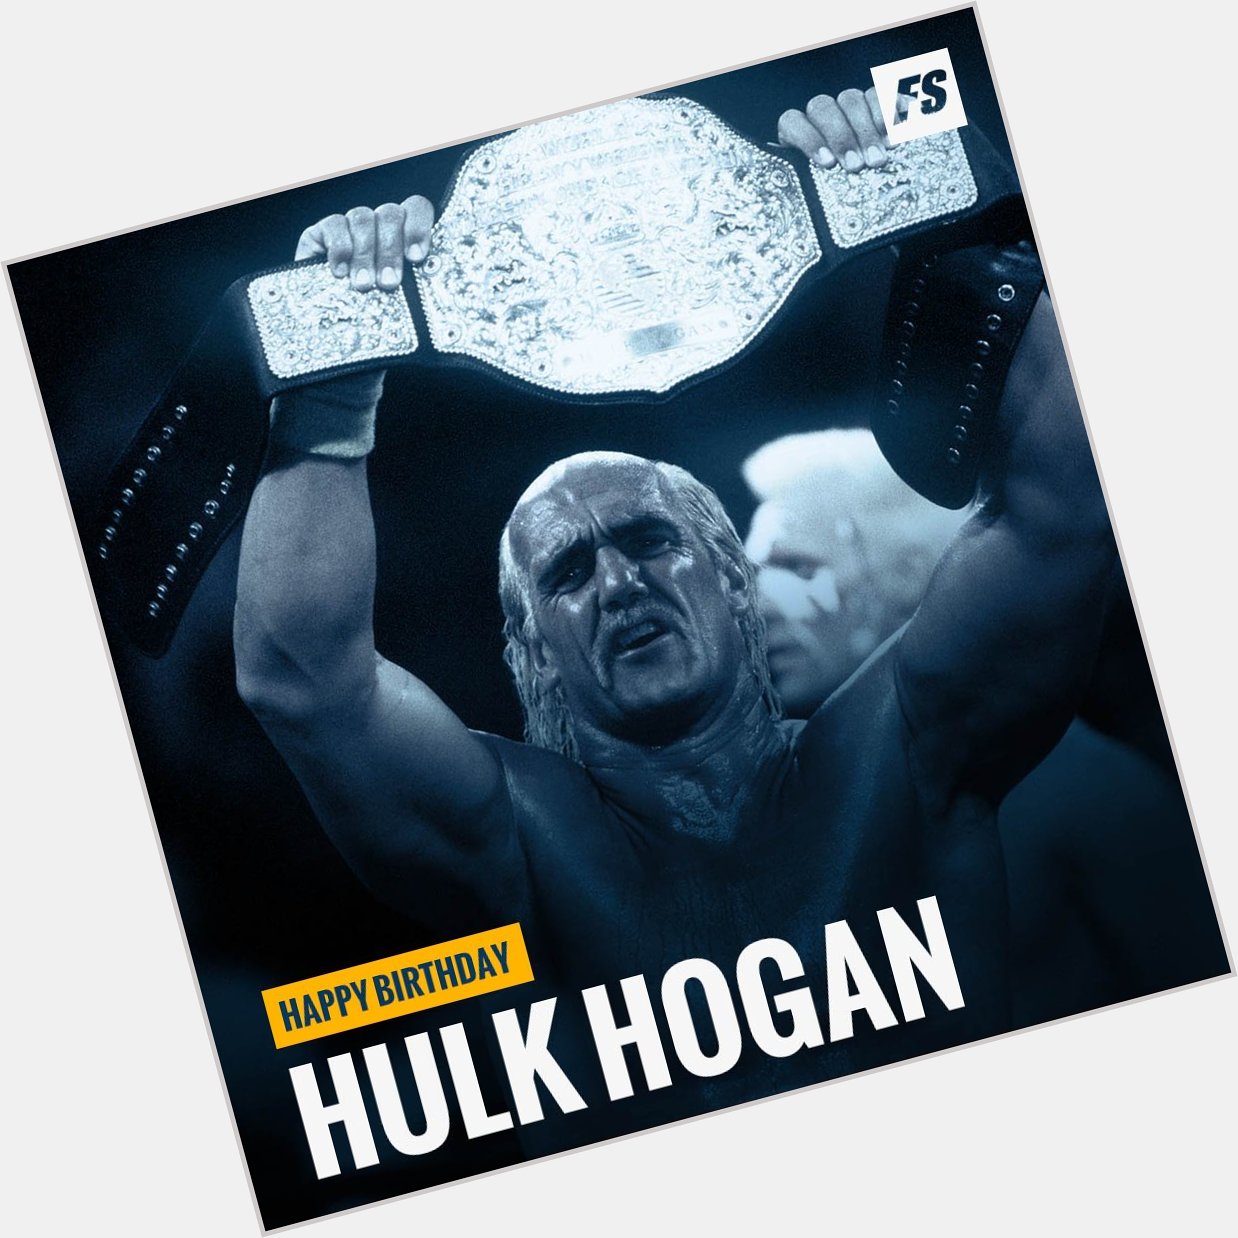 Happy birthday to one of the greatest professional wrestlers of all time, Hulk Hogan ( 